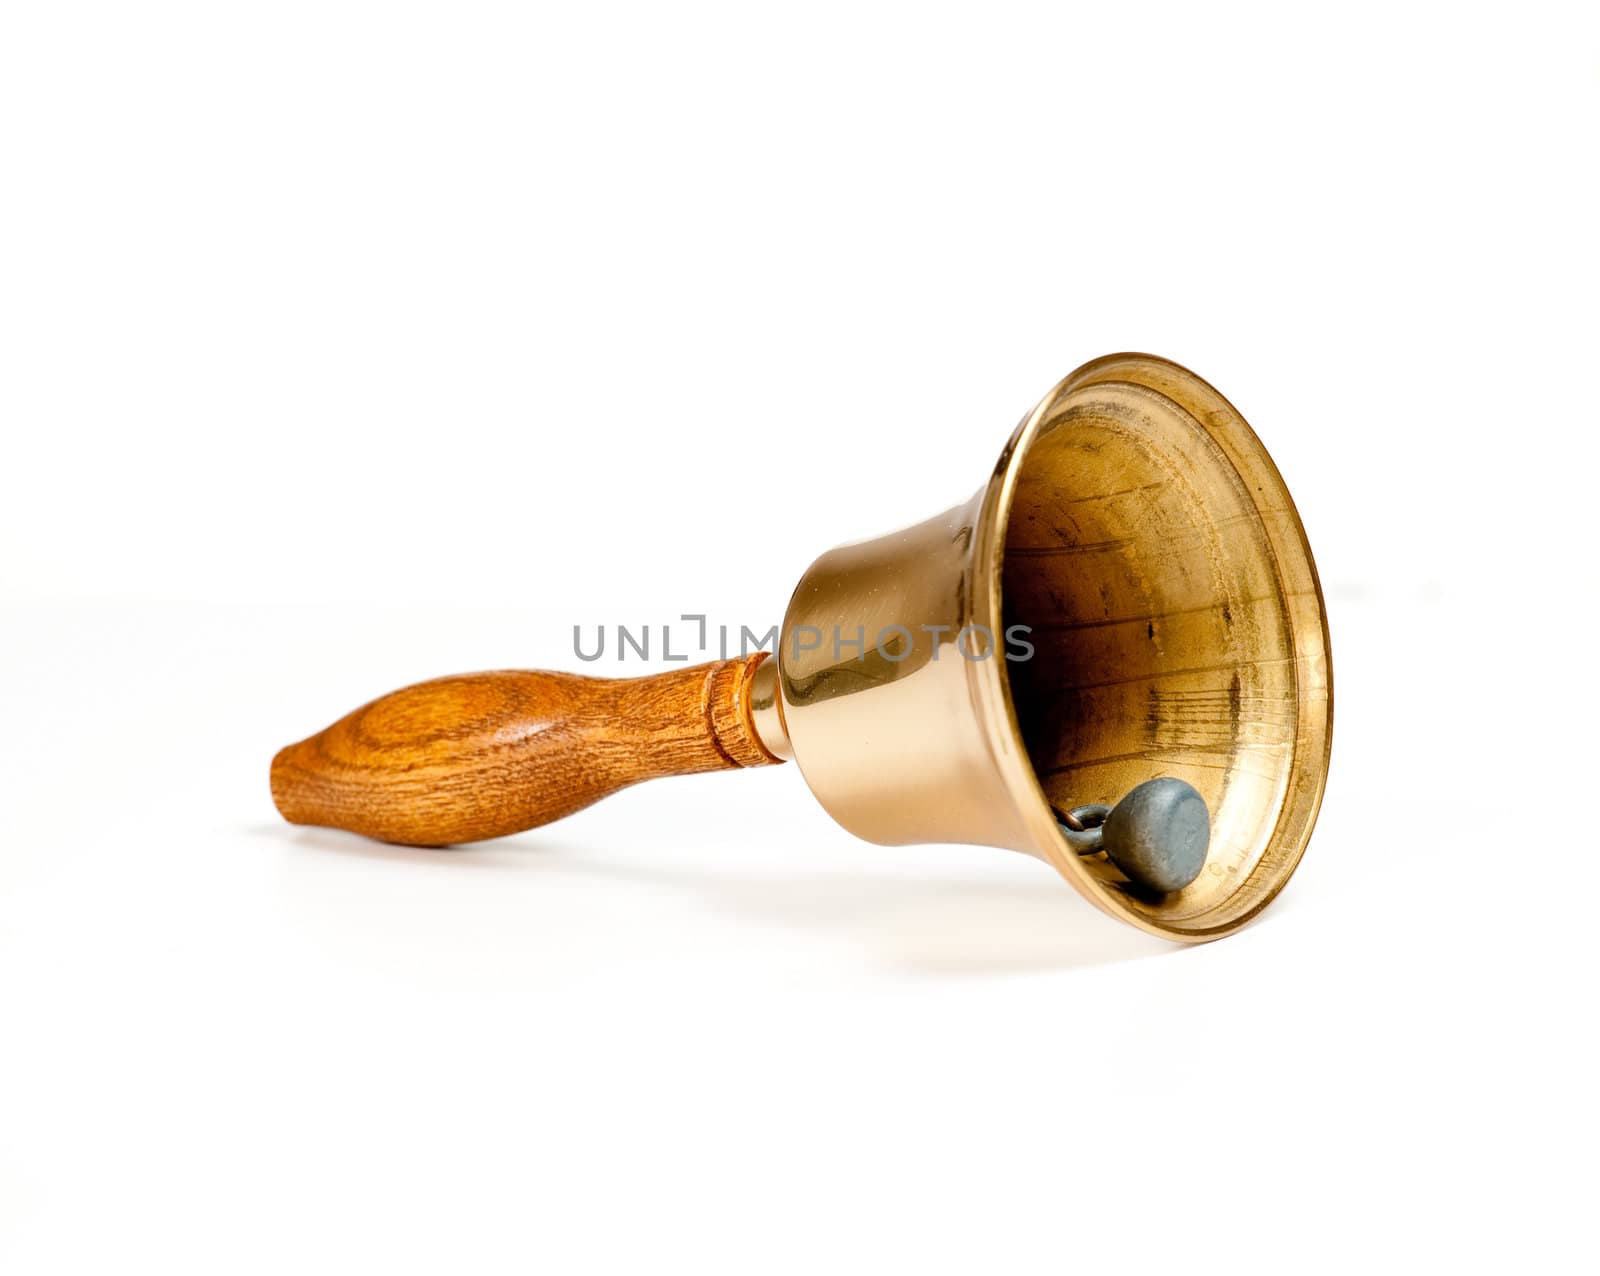 Brass handbell with wooden handle by steheap